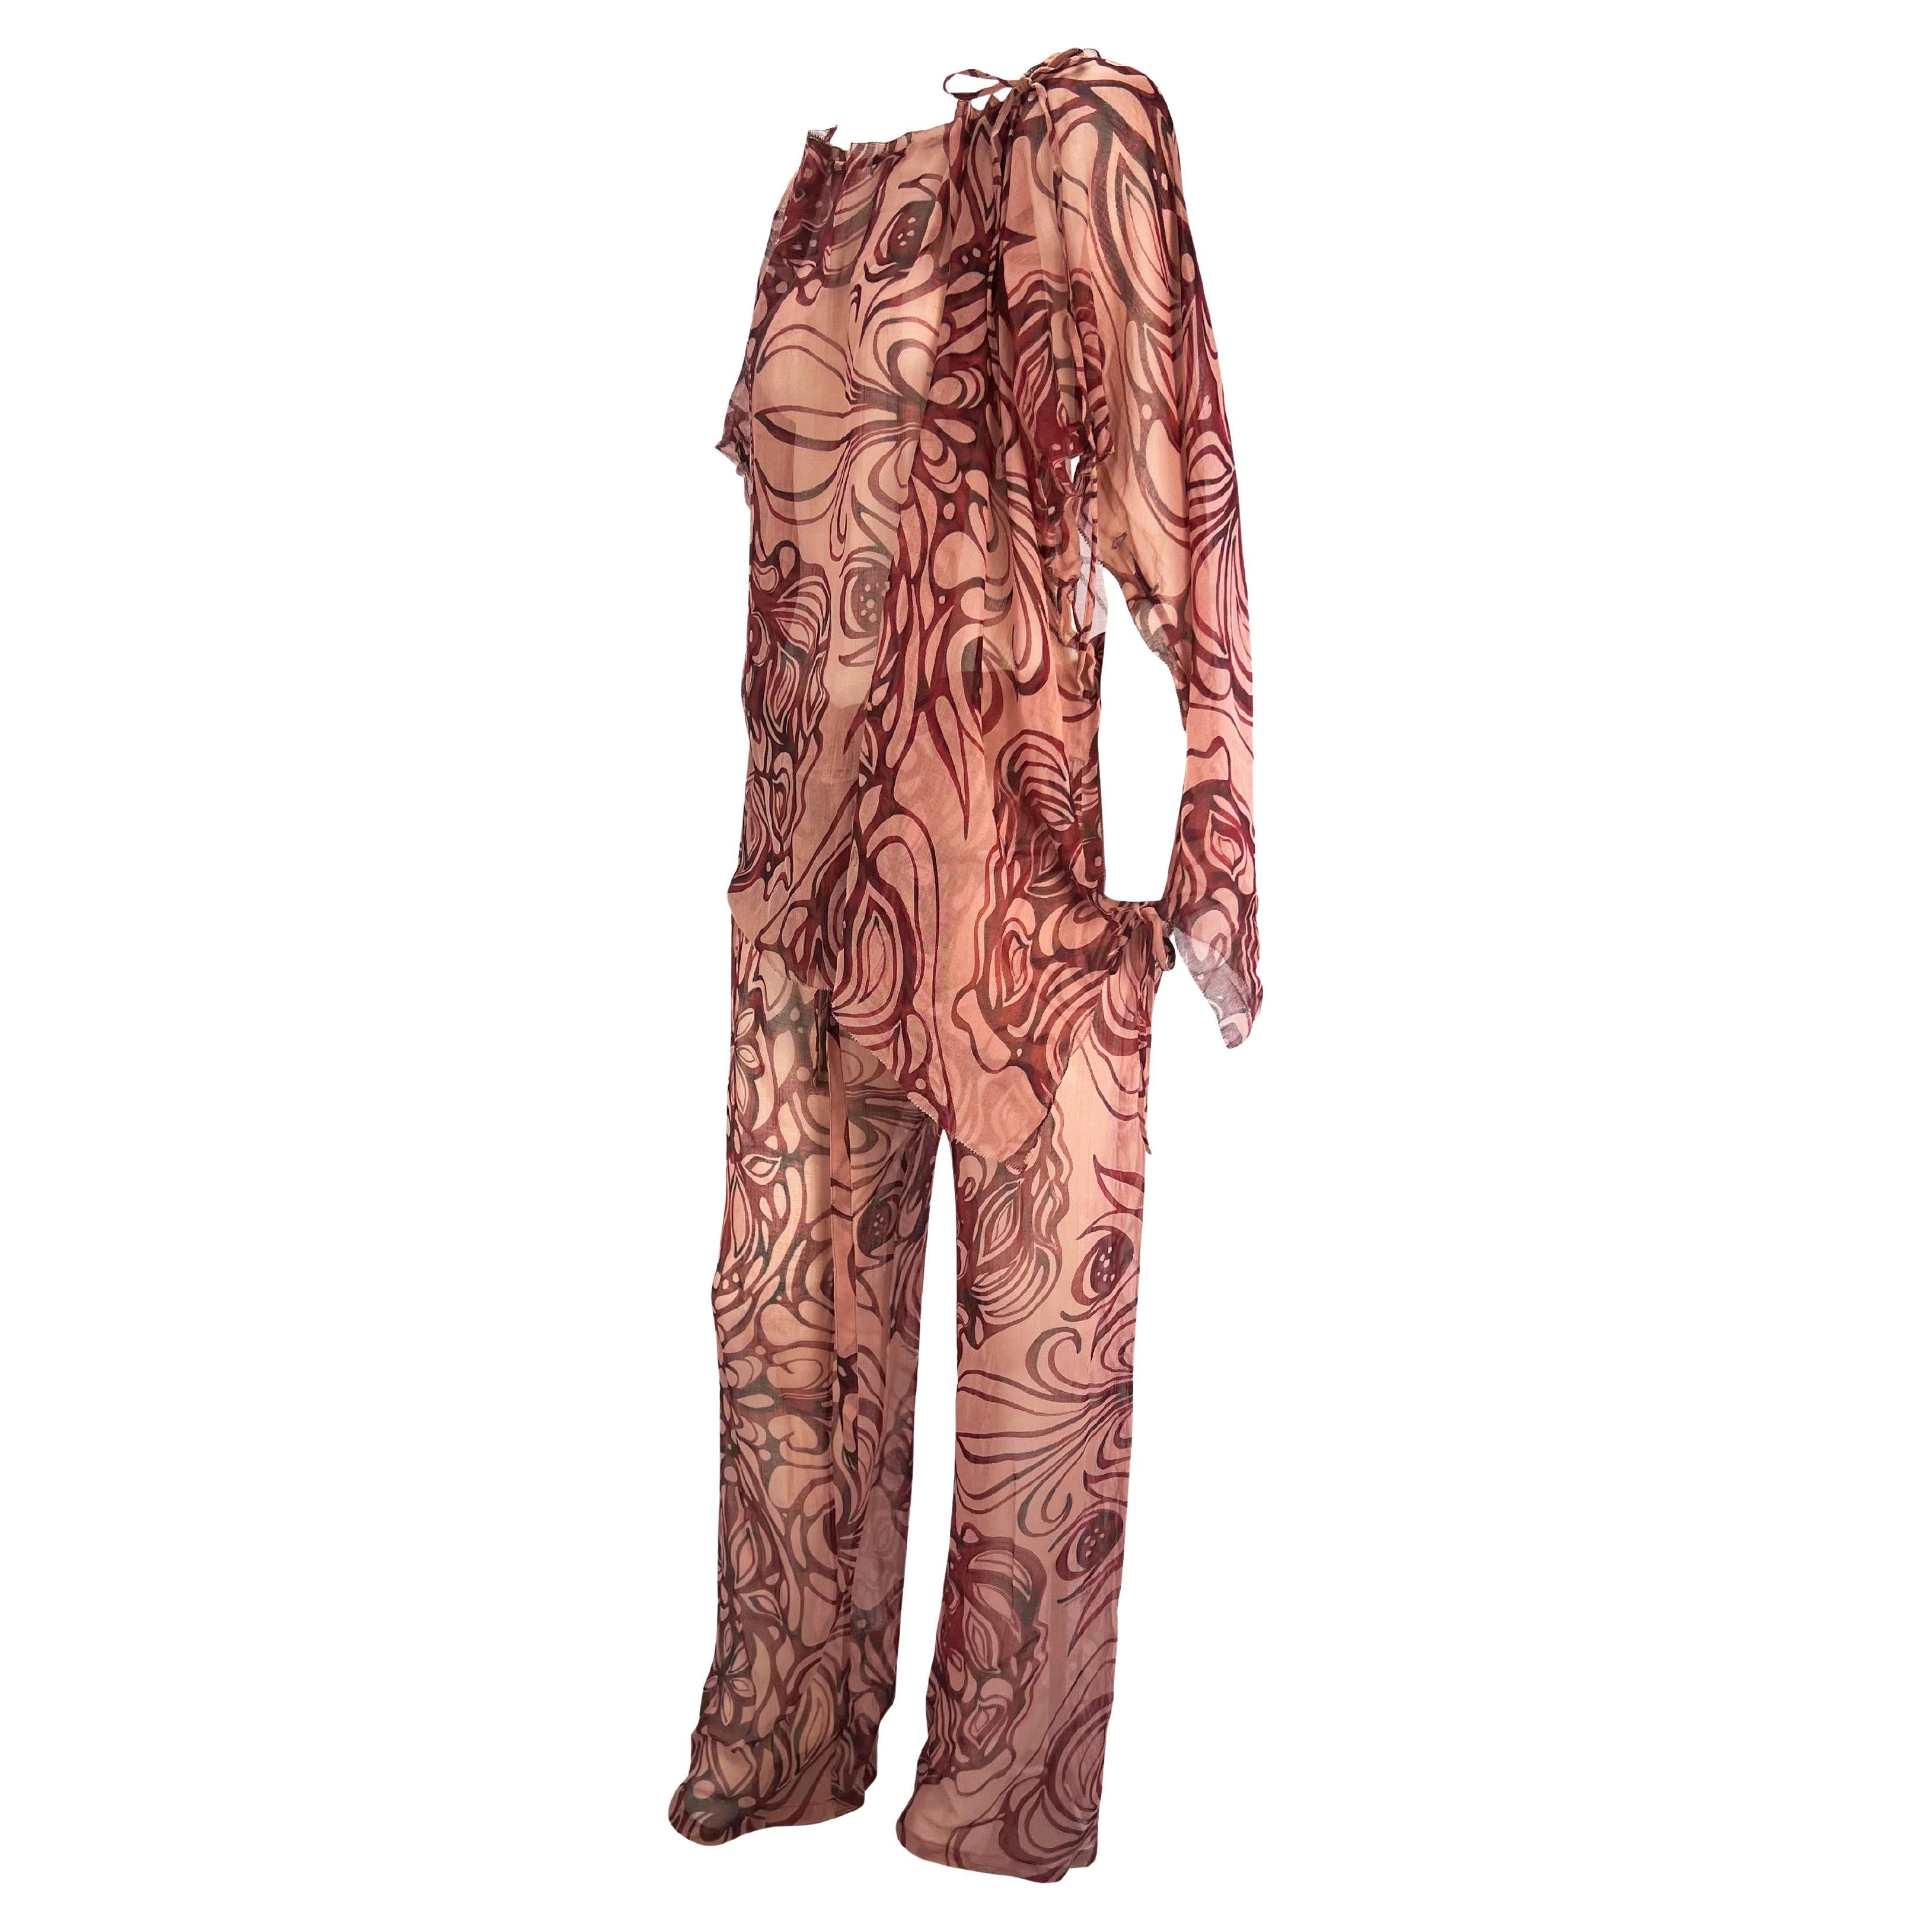 Presenting a matching floral sheer Gucci beach cover up set, designed by Tom Ford. From the Spring/Summer 2002 collection, this poncho and pant set feature beige fabric with a red and black floral/tattoo print. A rare find, the poncho features